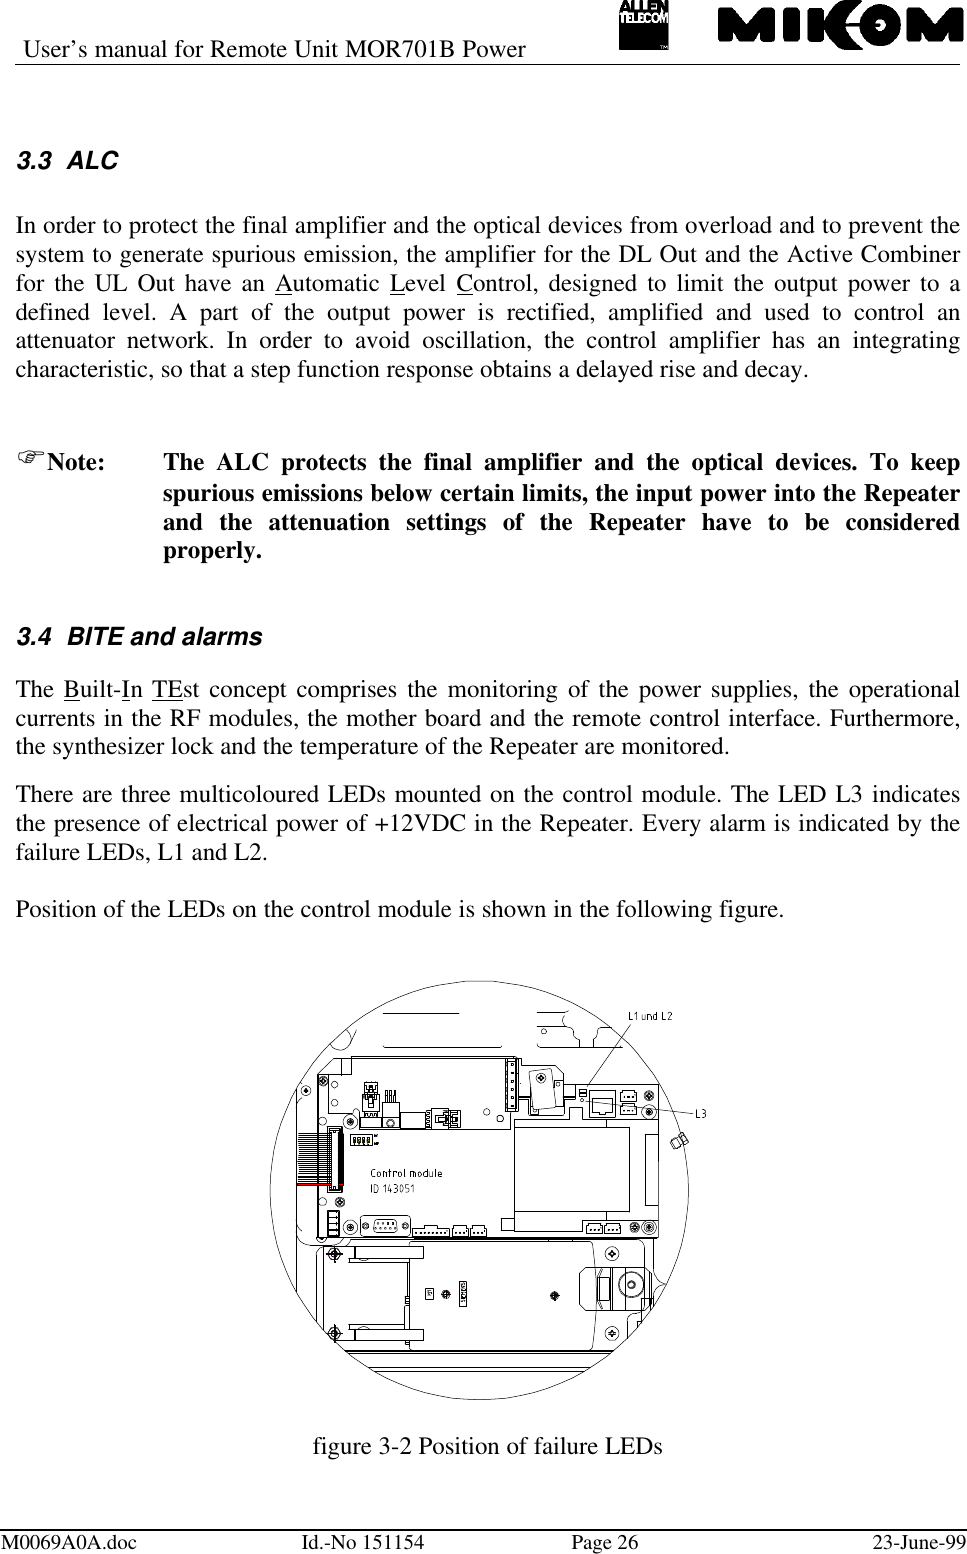 User’s manual for Remote Unit MOR701B PowerM0069A0A.doc Id.-No 151154 Page 26 23-June-993.3 ALCIn order to protect the final amplifier and the optical devices from overload and to prevent thesystem to generate spurious emission, the amplifier for the DL Out and the Active Combinerfor the UL Out have an Automatic Level Control, designed to limit the output power to adefined level. A part of the output power is rectified, amplified and used to control anattenuator network. In order to avoid oscillation, the control amplifier has an integratingcharacteristic, so that a step function response obtains a delayed rise and decay.FNote: The ALC protects the final amplifier and the optical devices. To keepspurious emissions below certain limits, the input power into the Repeaterand the attenuation settings of the Repeater have to be consideredproperly.3.4 BITE and alarmsThe Built-In TEst concept comprises the monitoring of the power supplies, the operationalcurrents in the RF modules, the mother board and the remote control interface. Furthermore,the synthesizer lock and the temperature of the Repeater are monitored.There are three multicoloured LEDs mounted on the control module. The LED L3 indicatesthe presence of electrical power of +12VDC in the Repeater. Every alarm is indicated by thefailure LEDs, L1 and L2.Position of the LEDs on the control module is shown in the following figure.figure 3-2 Position of failure LEDs